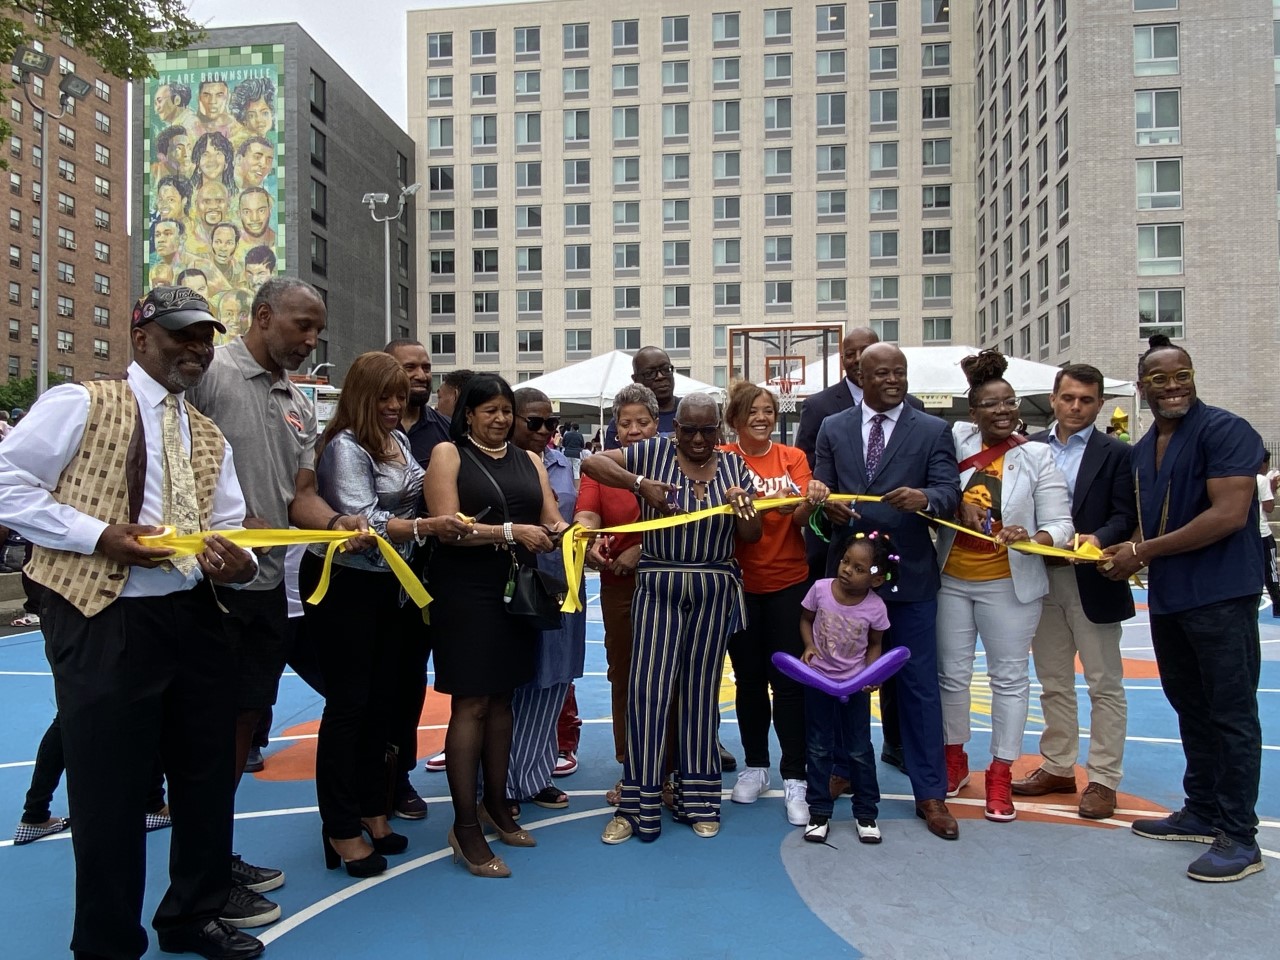 The Brownsville community formally dedicated the new mural and renovated basketball court with a ribbon-cutting celebration.